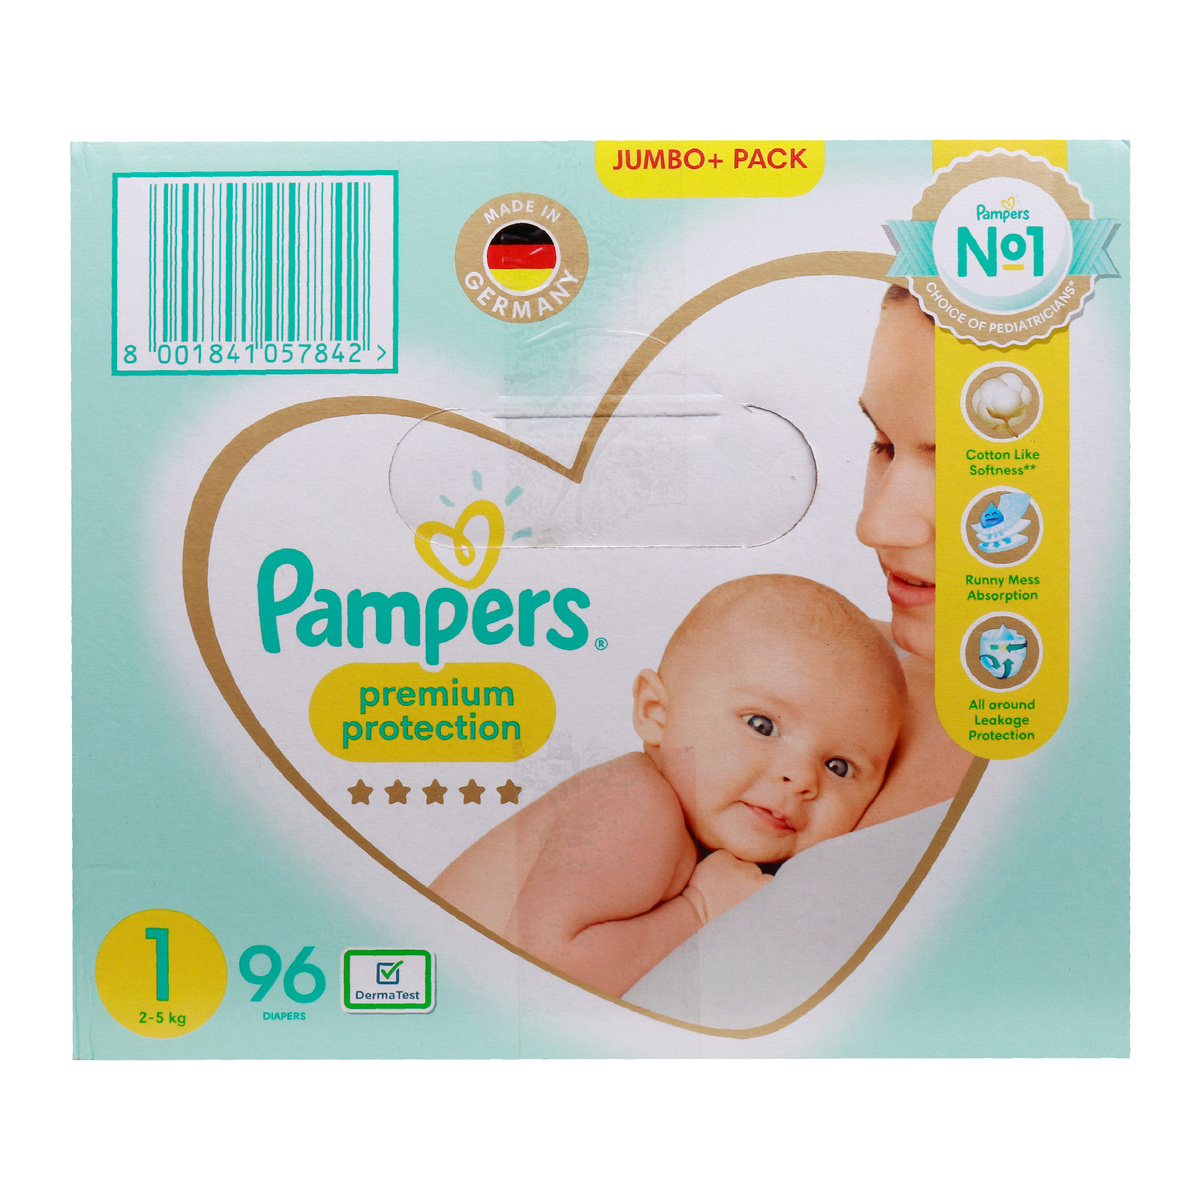 Pampers Premium Care Diapers Online, Falcon fresh Online